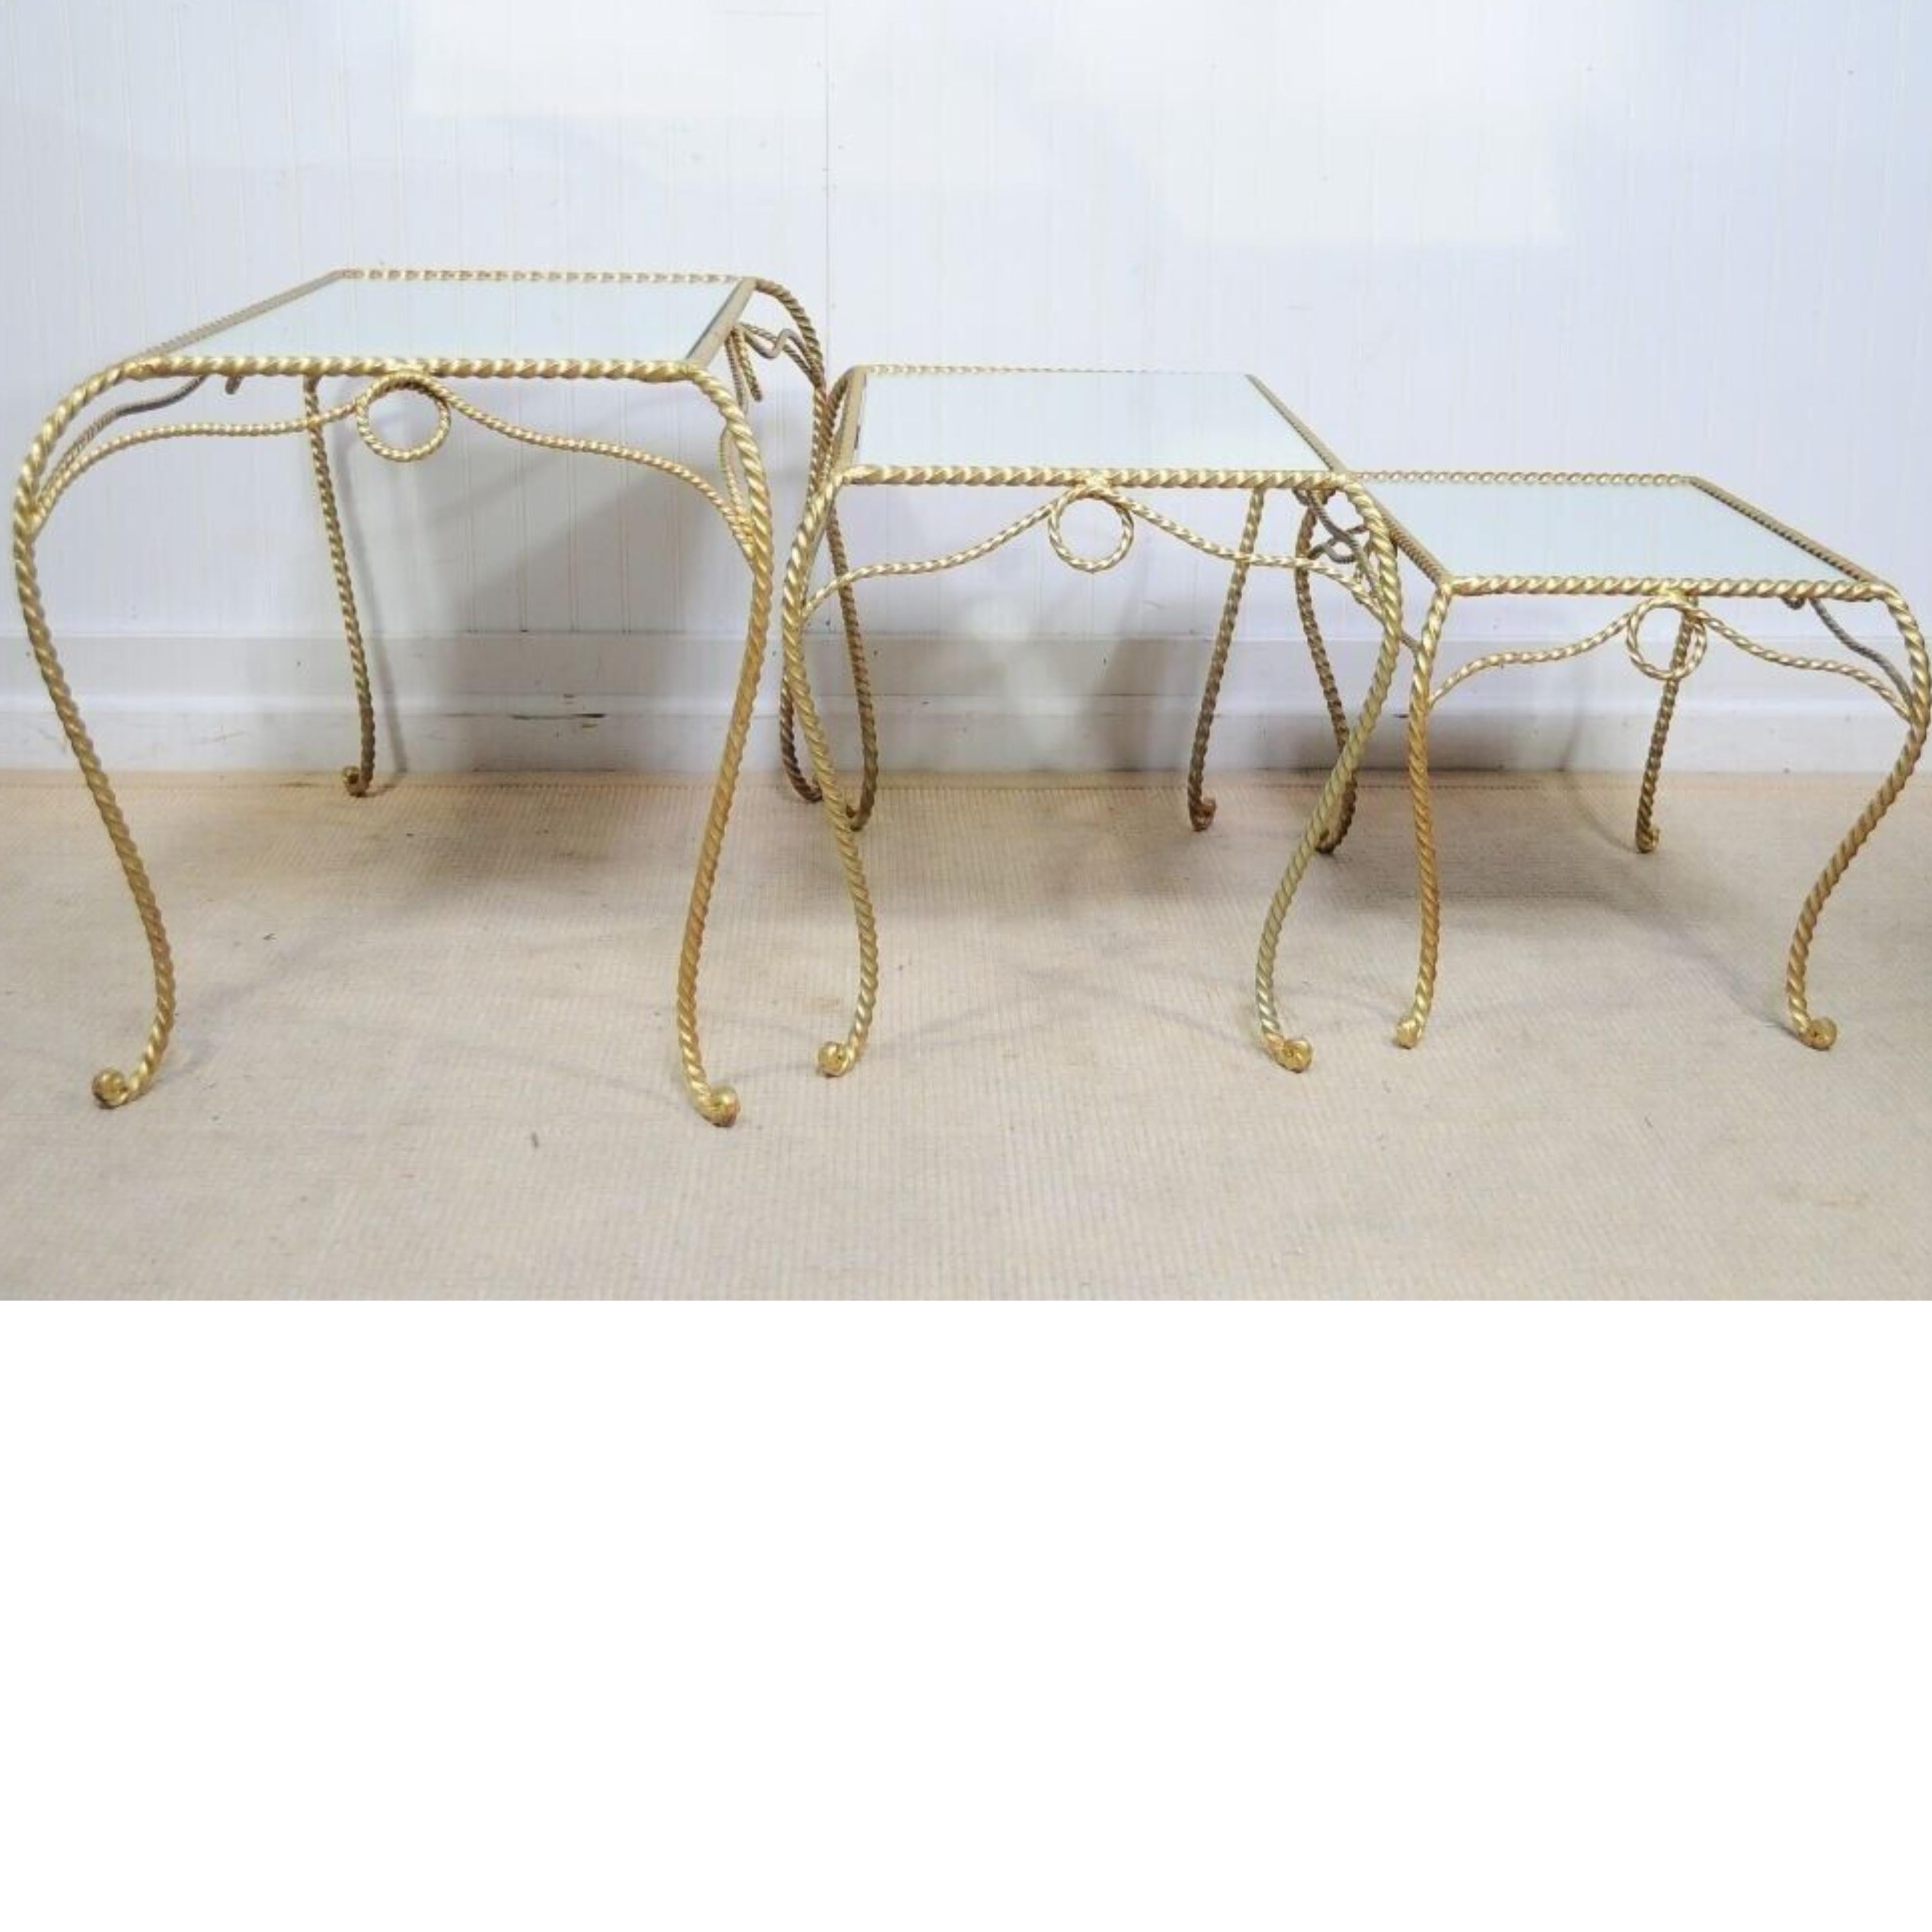 Vintage Italian Hollywood Regency Gold Nesting Rope Mirror Tole End Tables - Set of 3
Item features scrolling frames, mirrored tops, graduating size, very nice vintage set. 
Circa Mid 20th Century.
Measurements: 
Small Table: 14